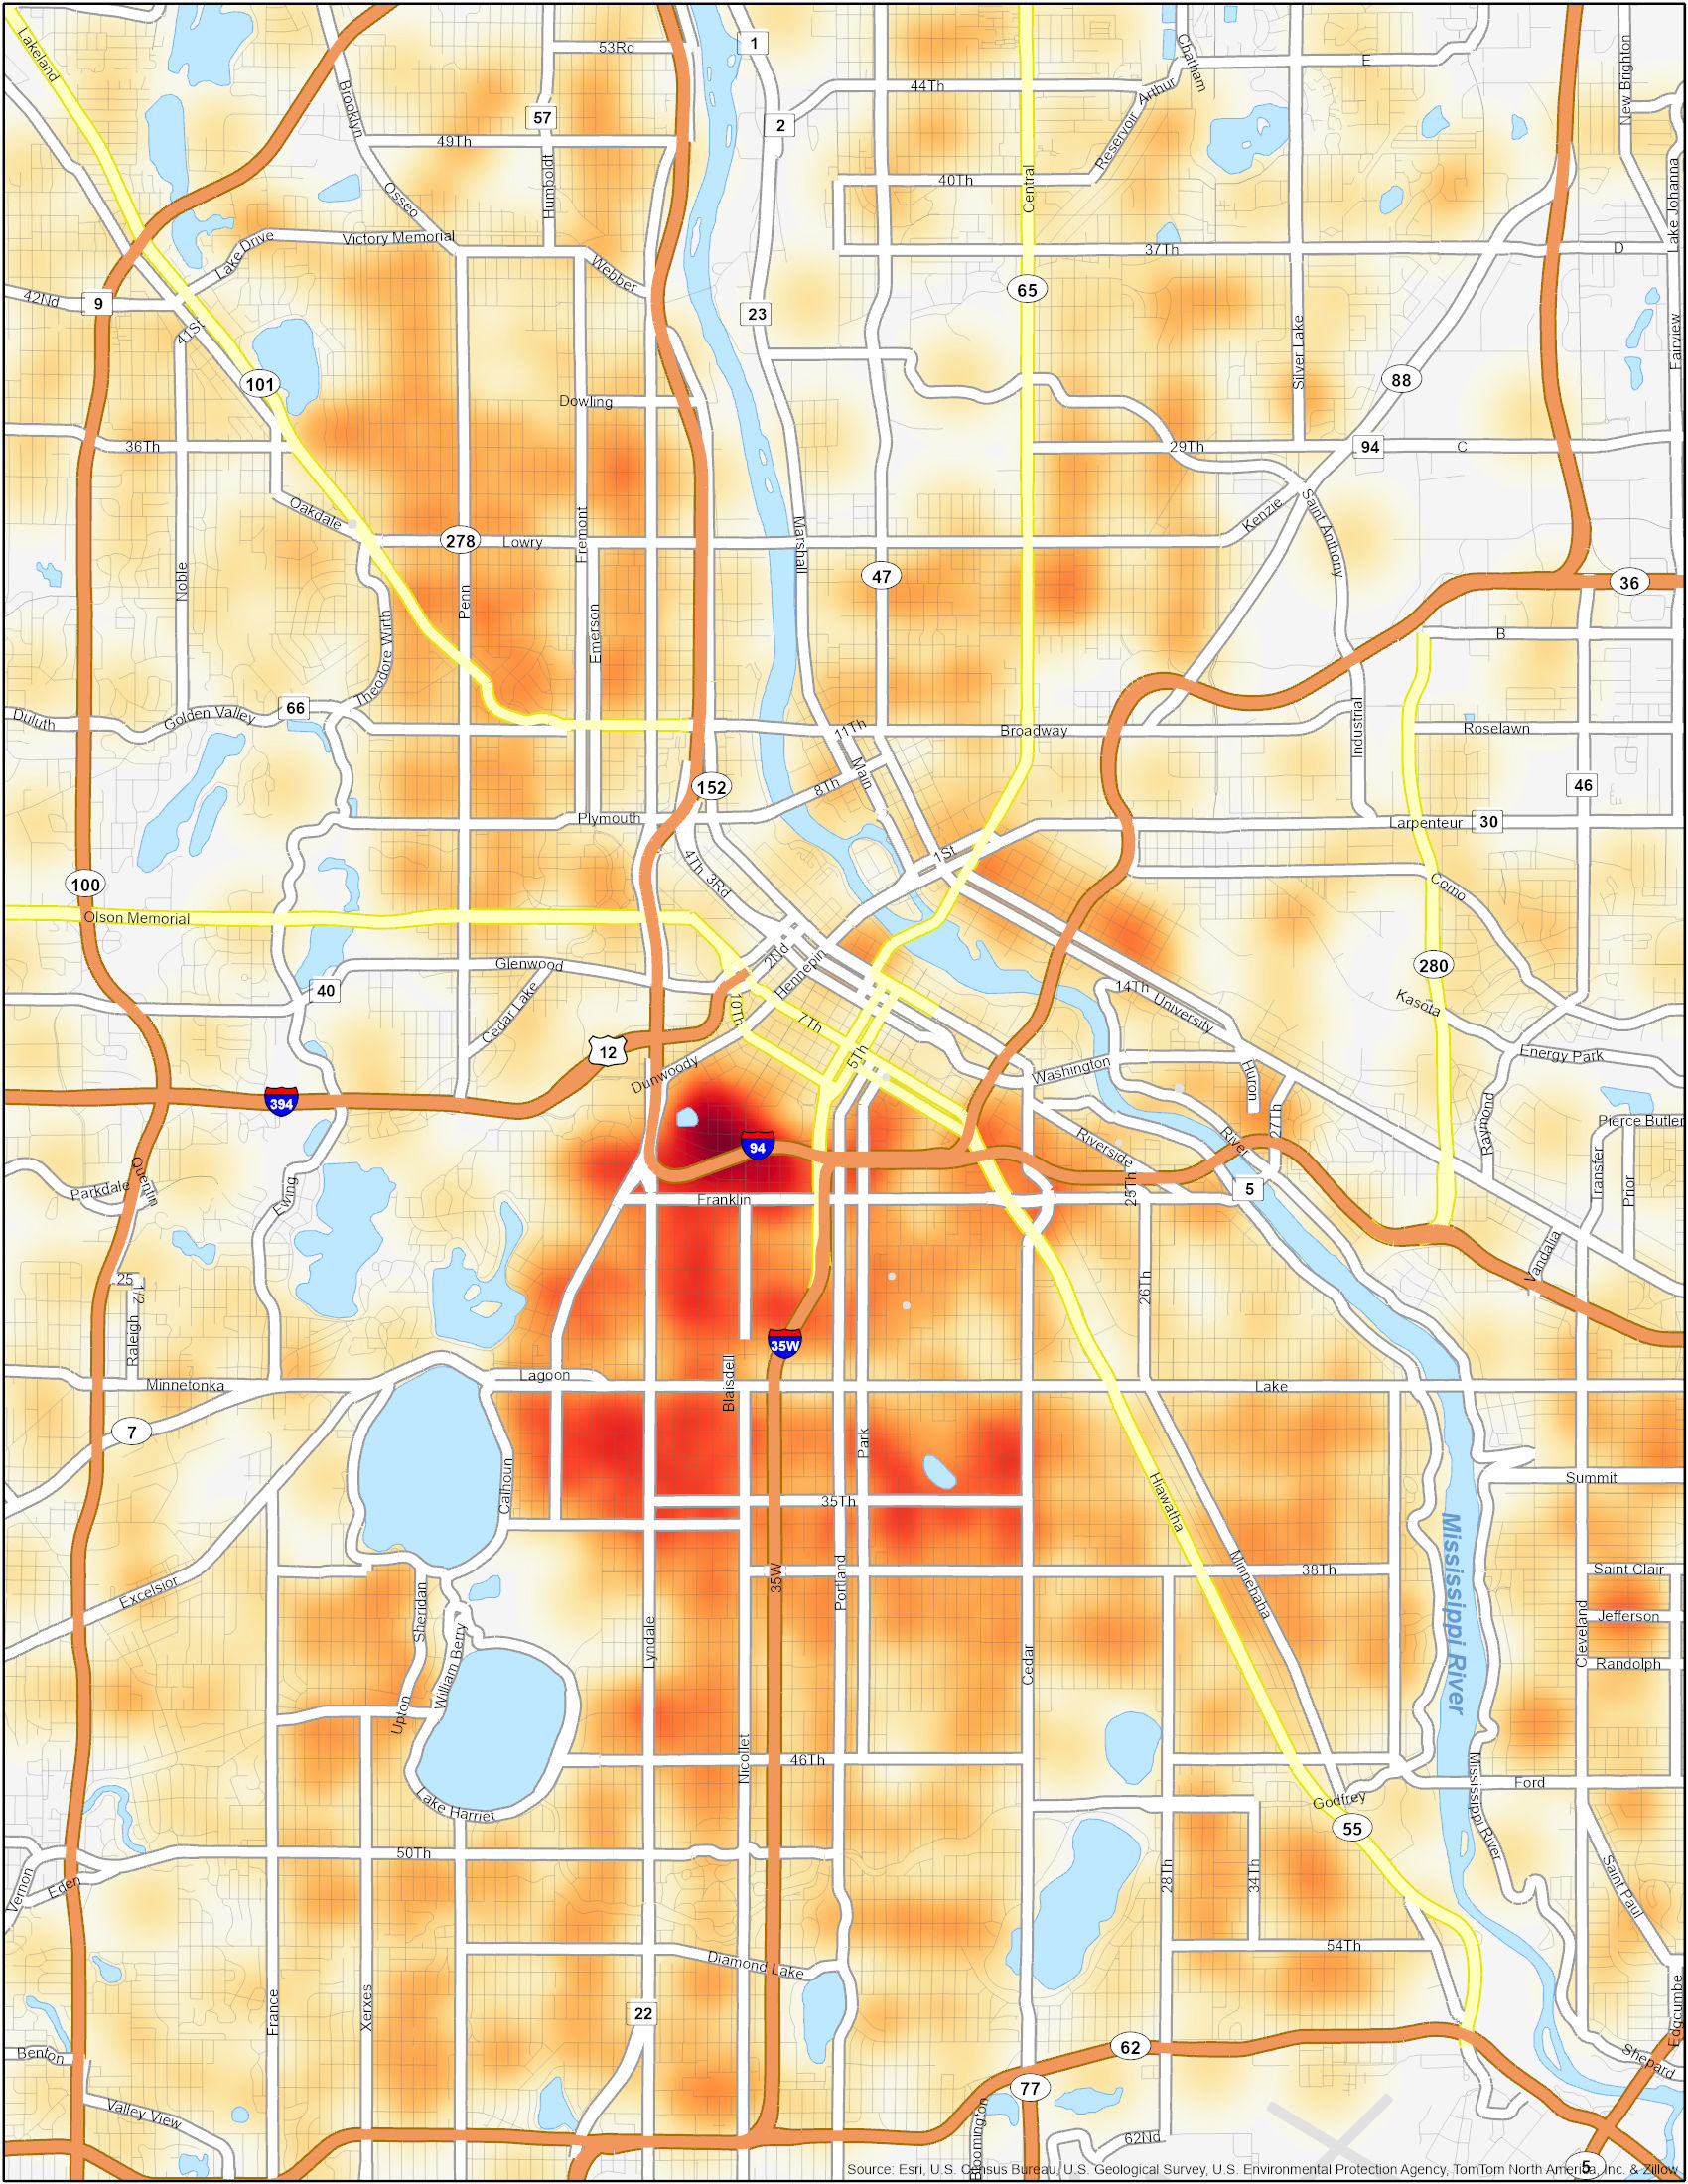 St. Paul, MN Violent Crime Rates and Maps